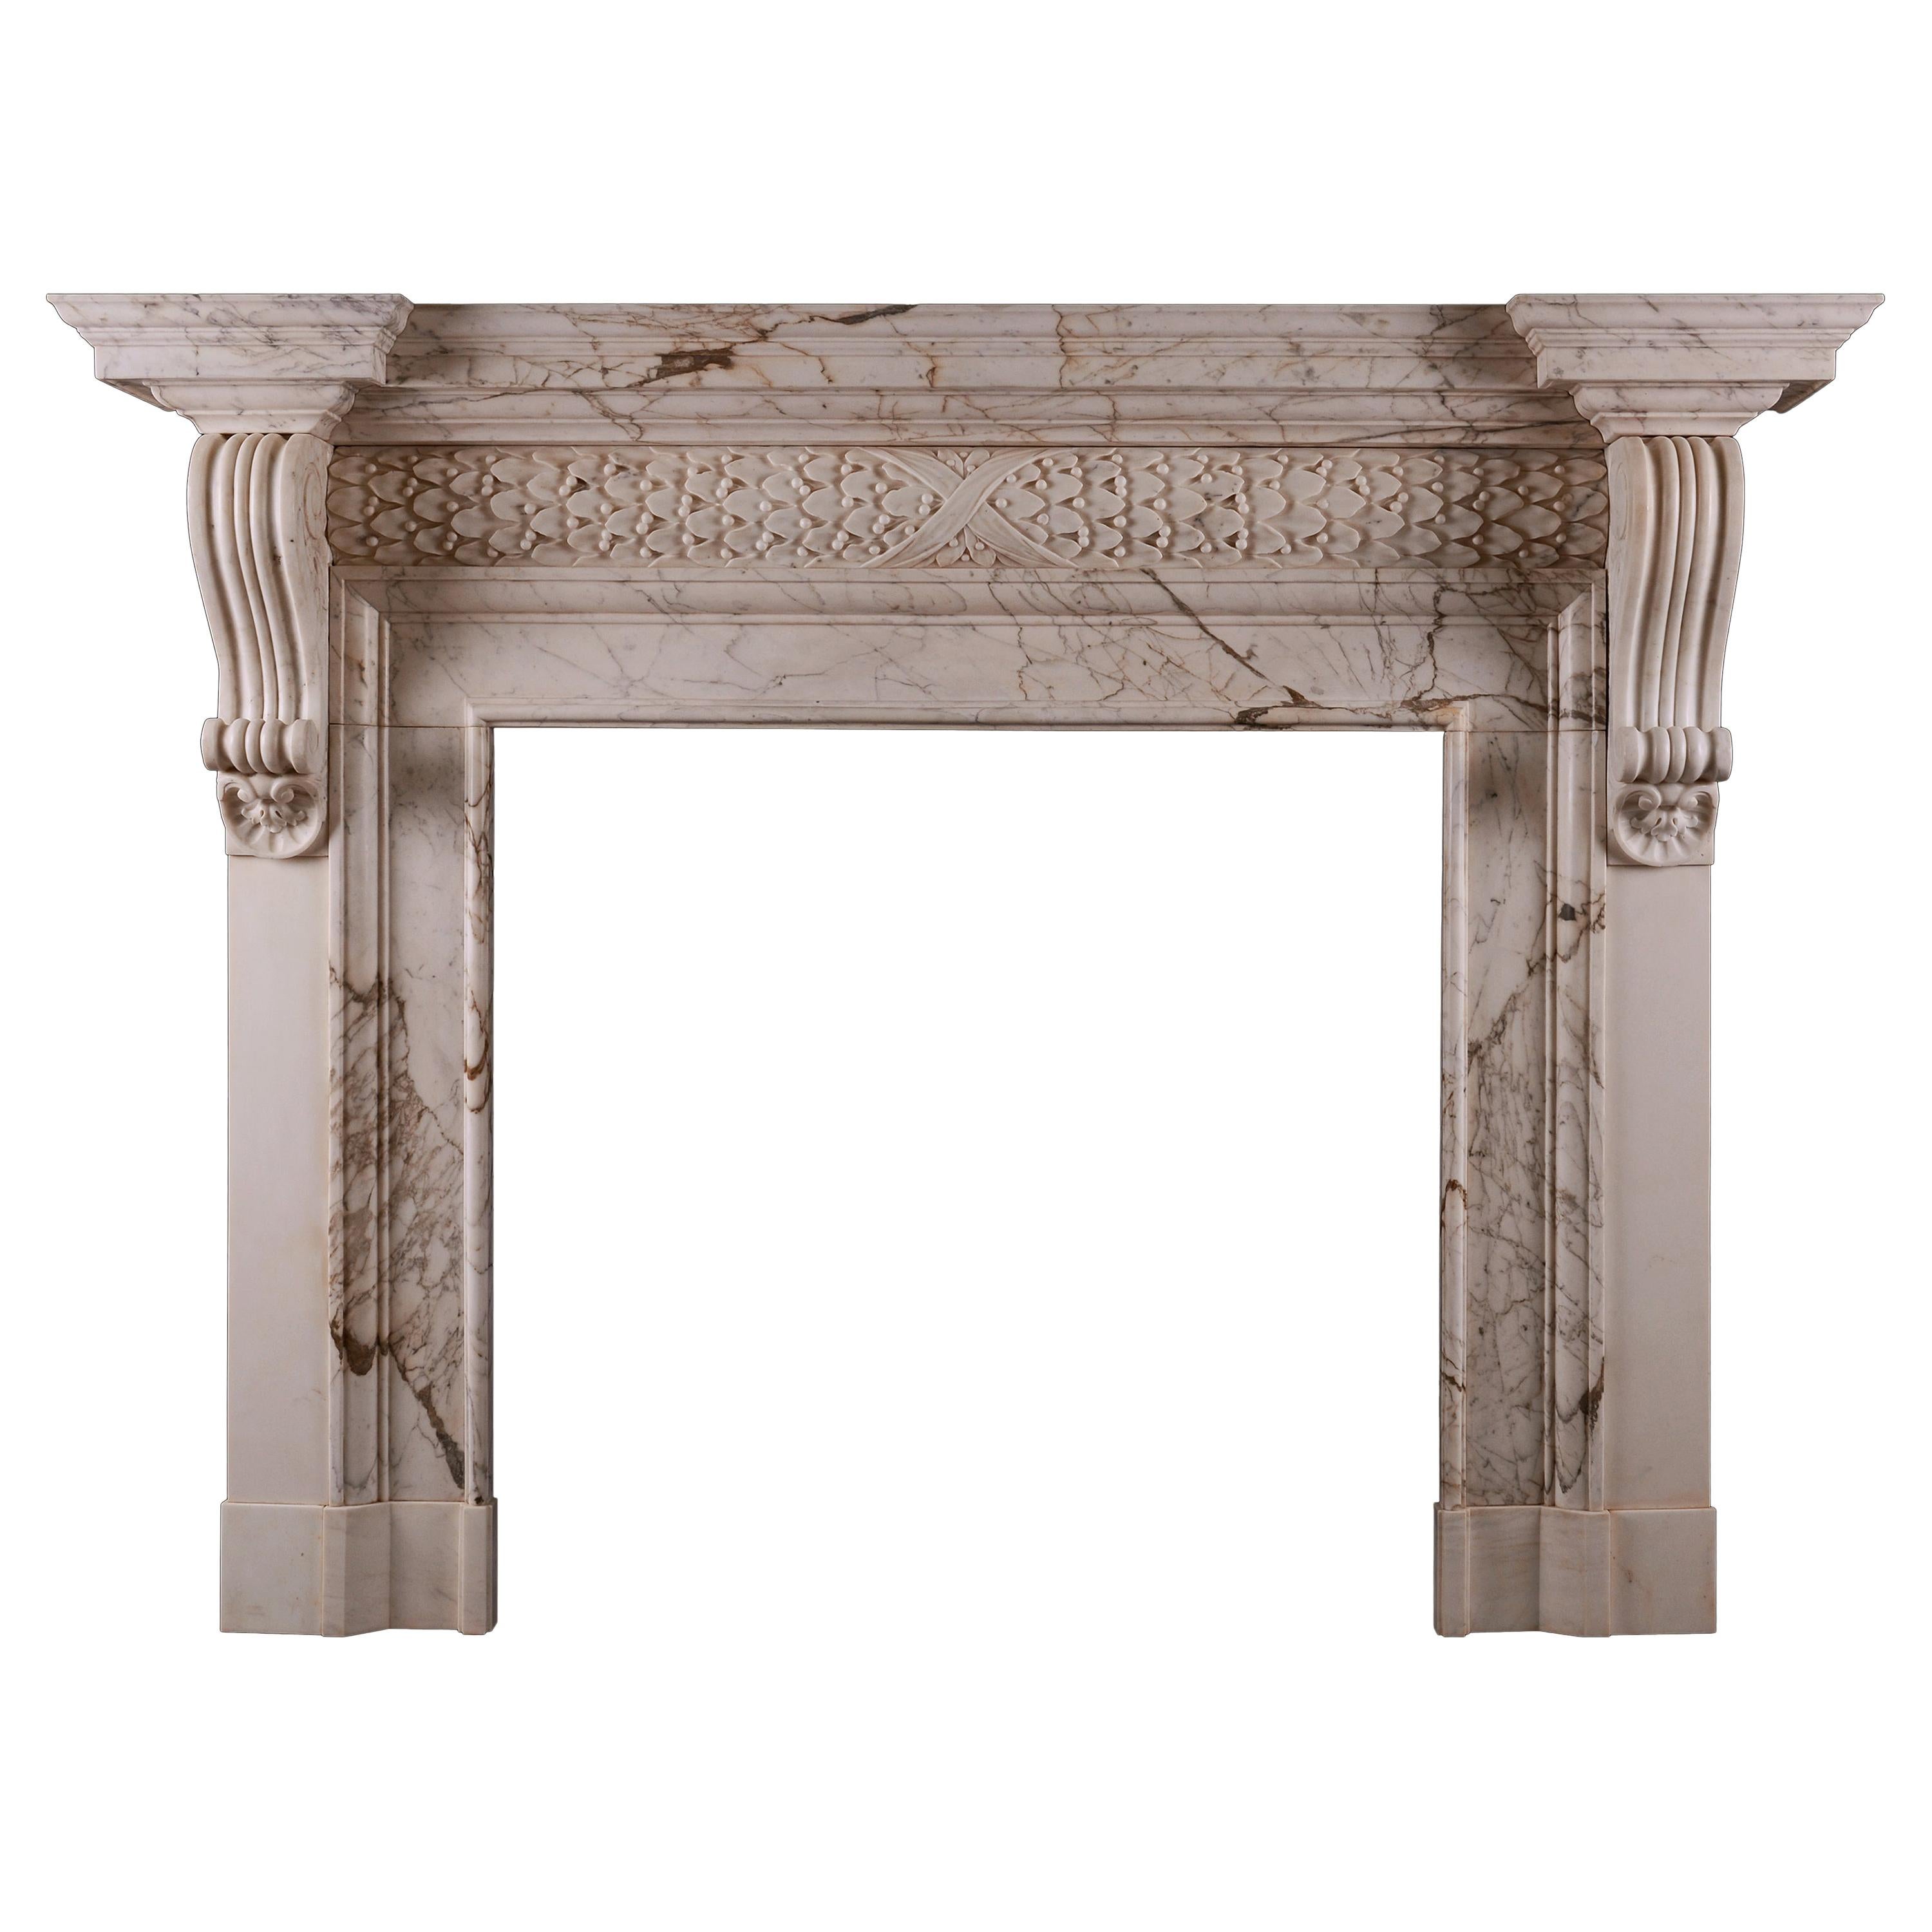 Imposing Period Georgian Fireplace in Calacatta Oro Marble For Sale